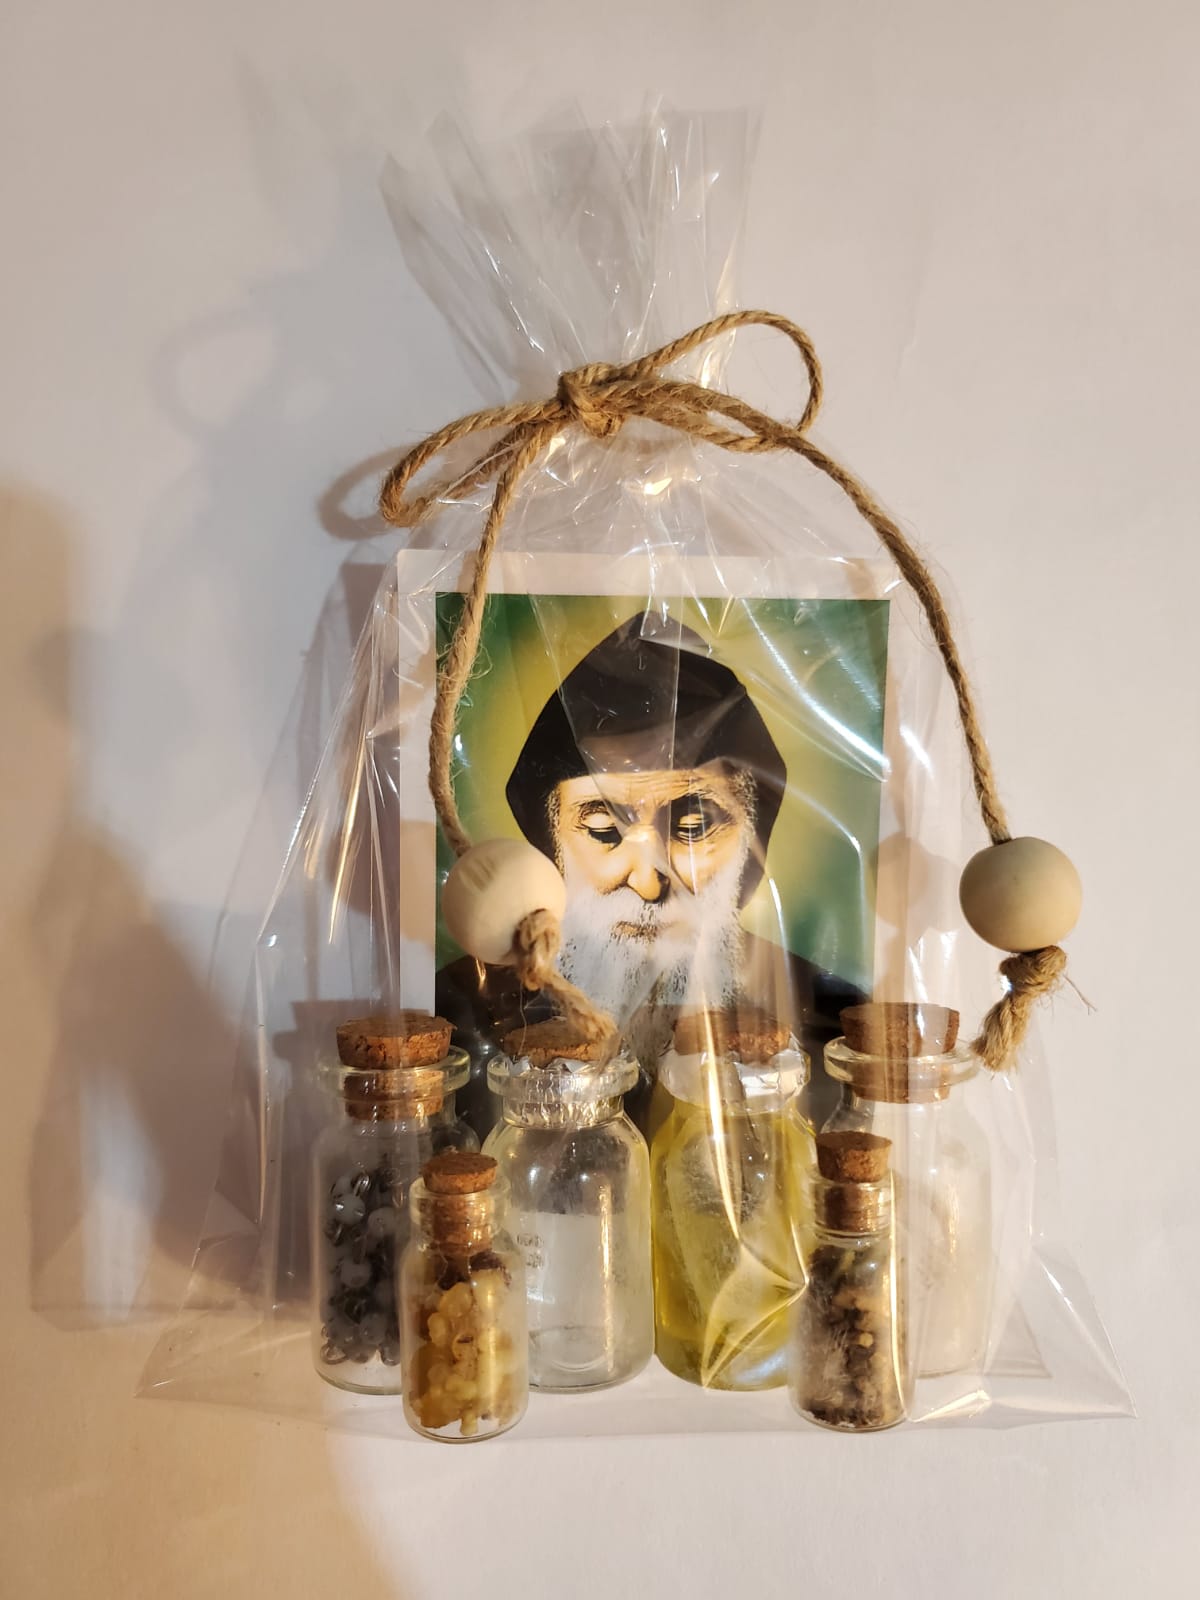 Set of oil, water, incense, soil and relic of Saint Charbel - Our Lady of Gifts 